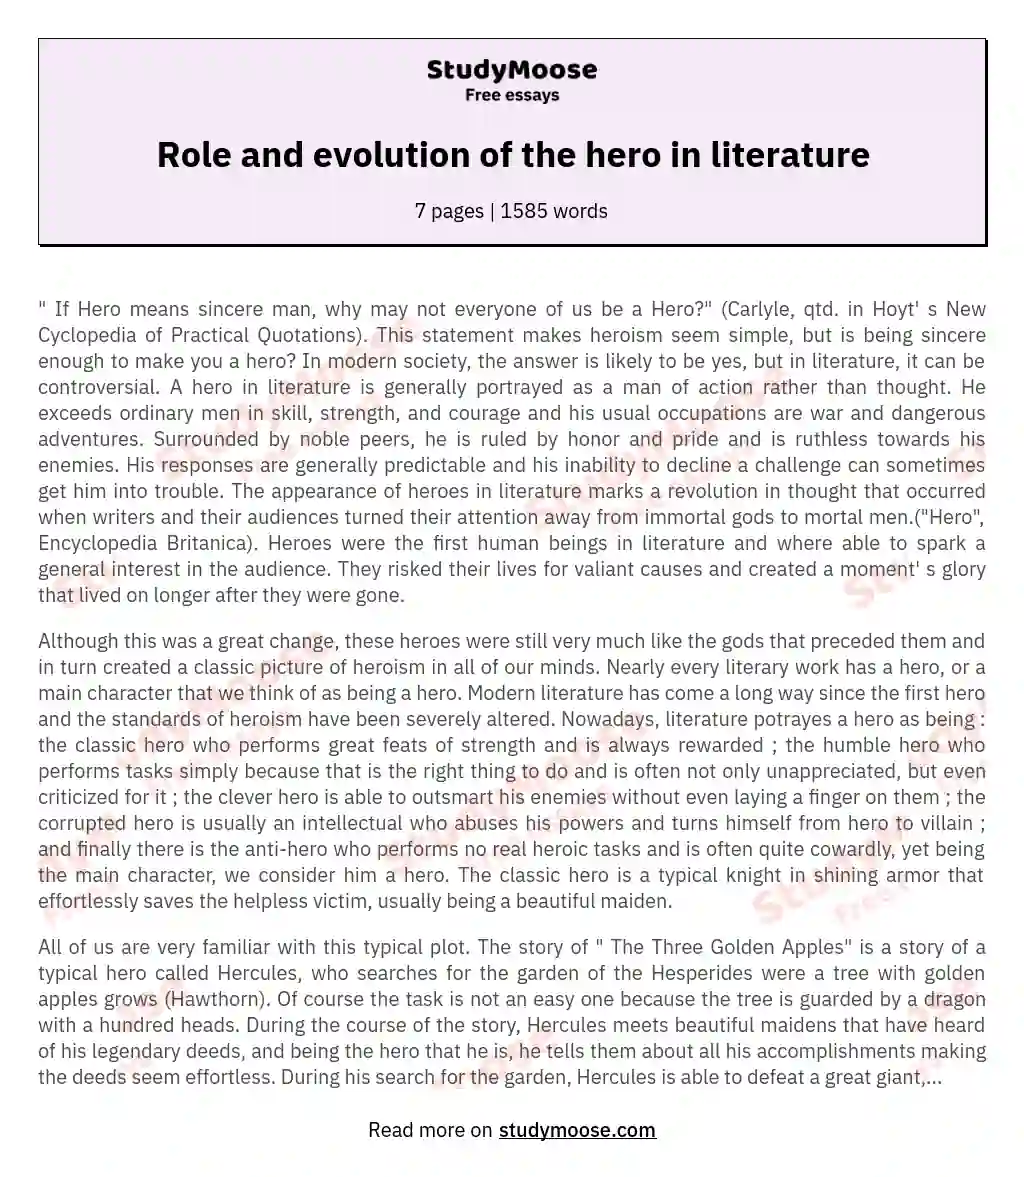 Role and evolution of the hero in literature essay